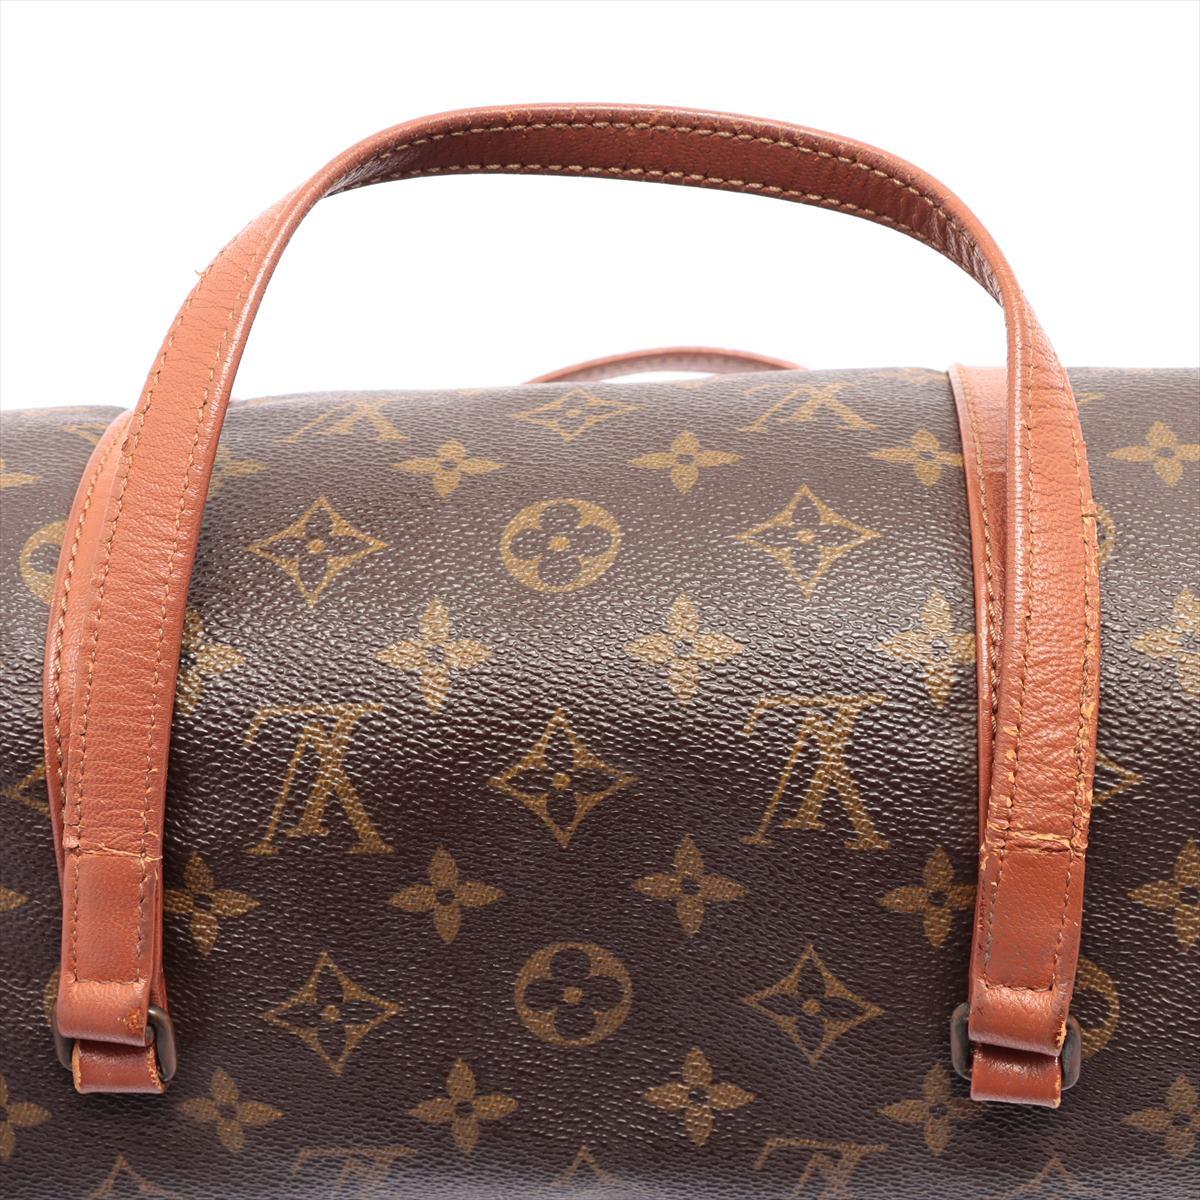 Brown and tan monogram coated canvas Louis Vuitton Papillon 30 cm with gold-tone For Sale 6